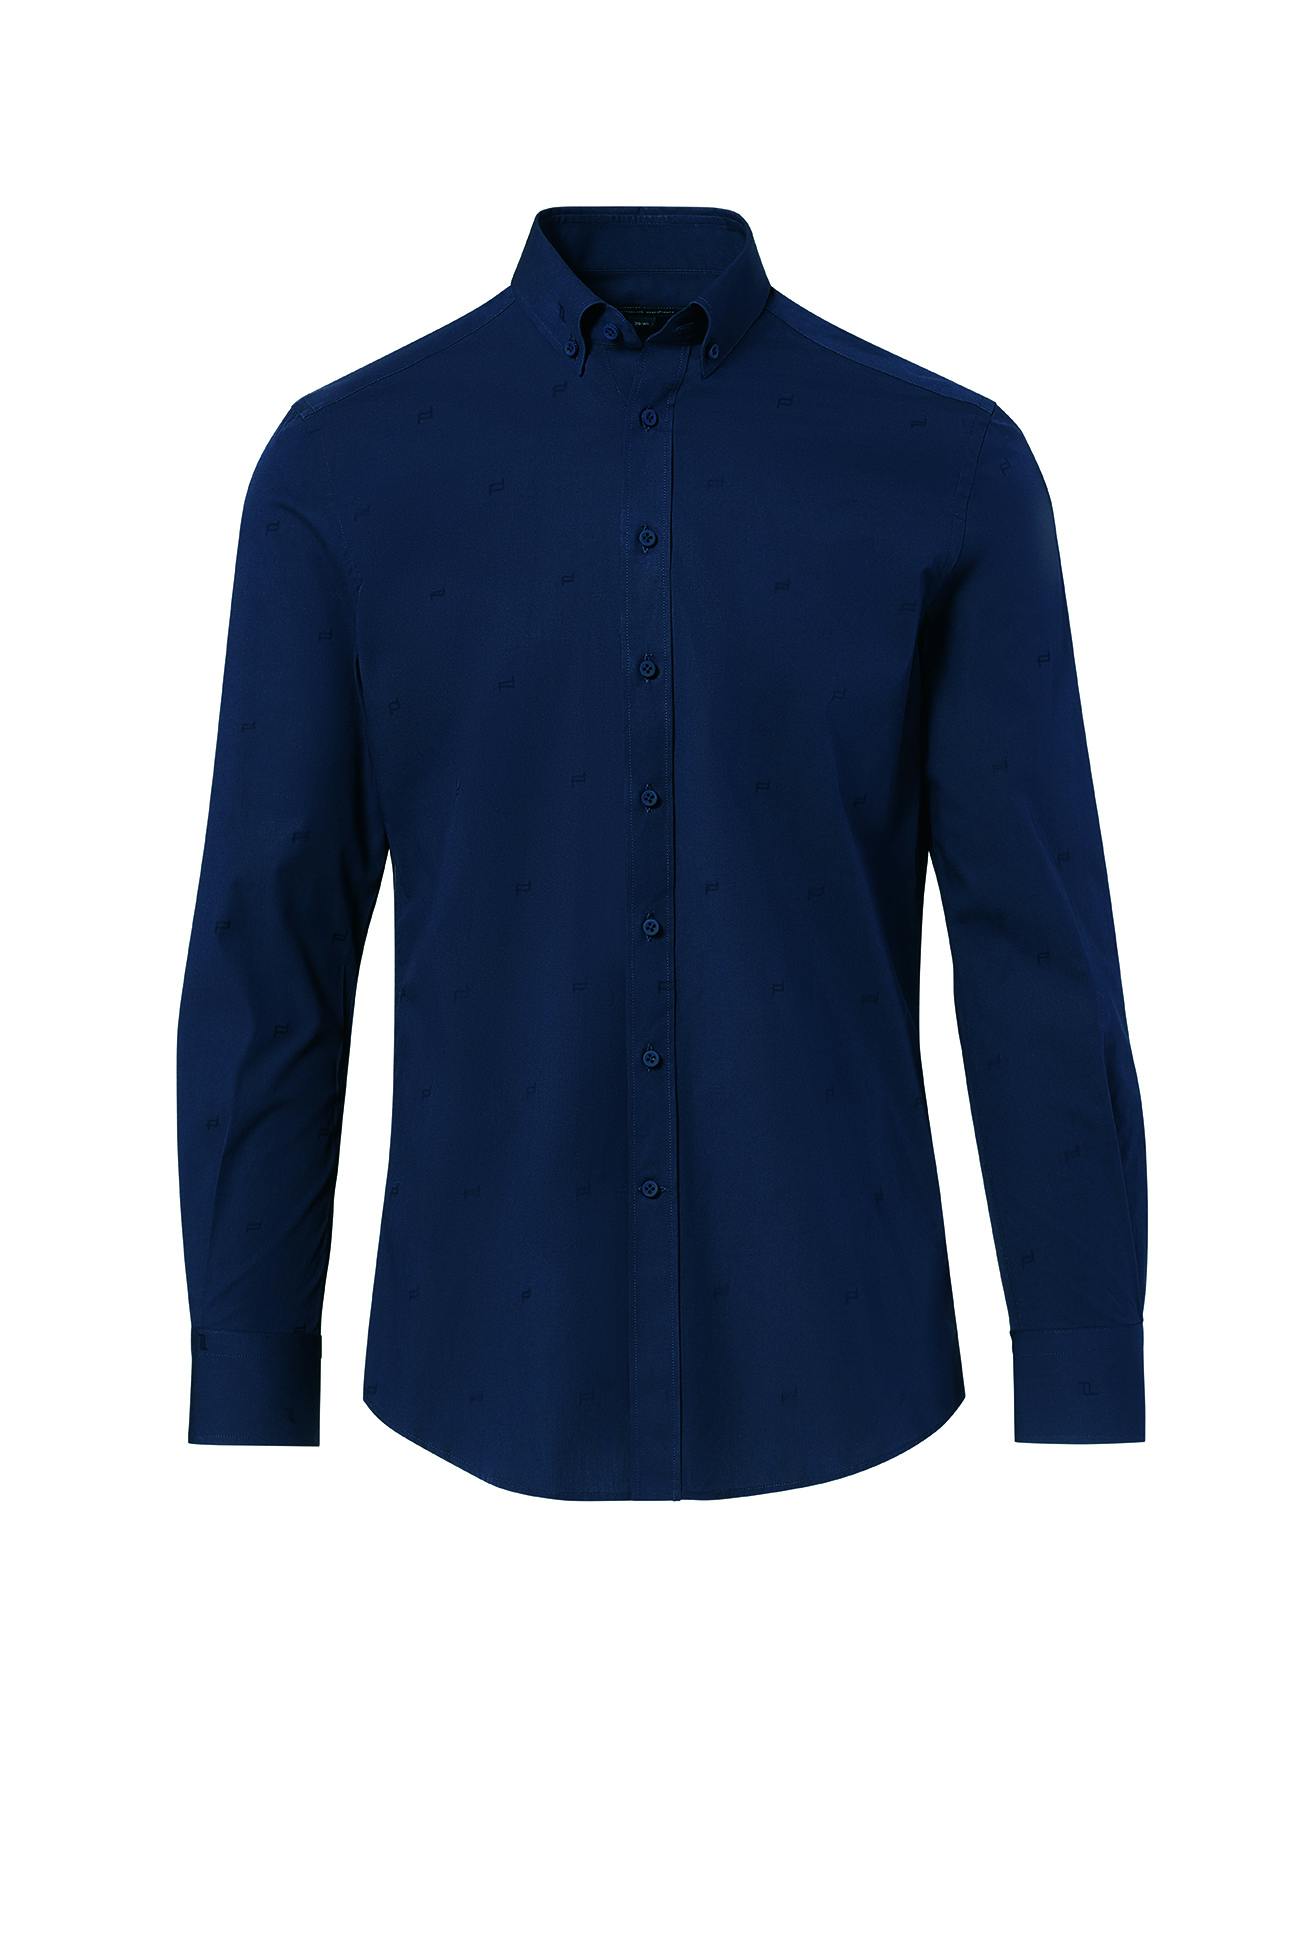 PD_LUXE PD ICON BUTTON DOWN SHIRT_4046901591335